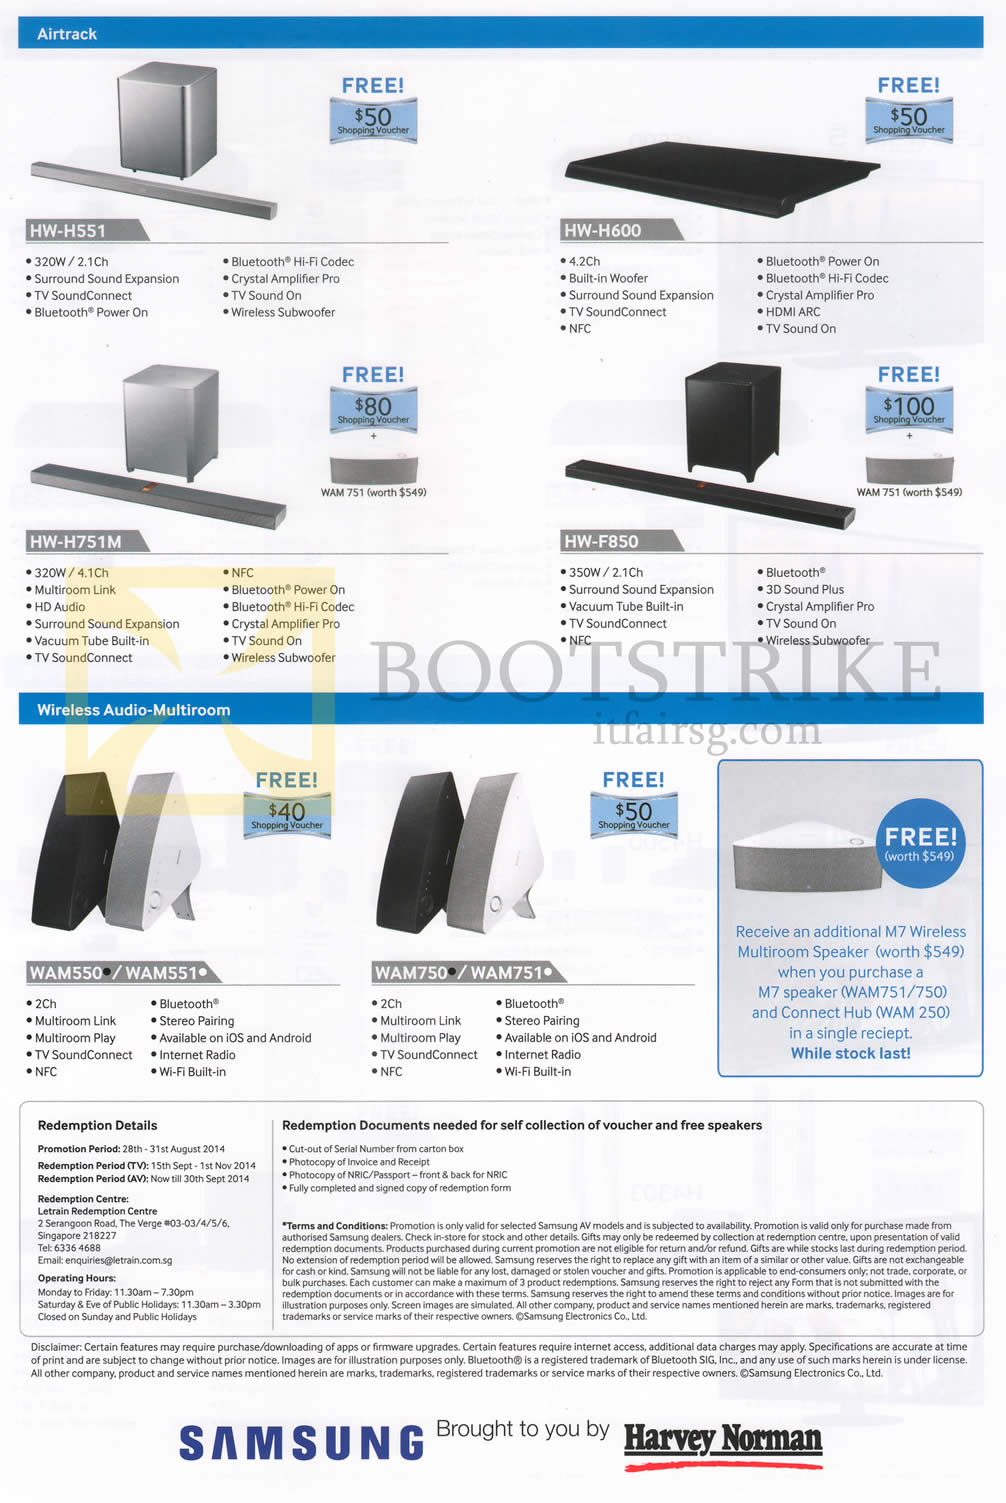 COMEX 2014 price list image brochure of Samsung Speakers (No Prices) Air Track, Wireless Audio Multiroom HW-H551, HW-H600, HW-H751M, HW-F850, WAM550, WAM551, WAM750, WAM751